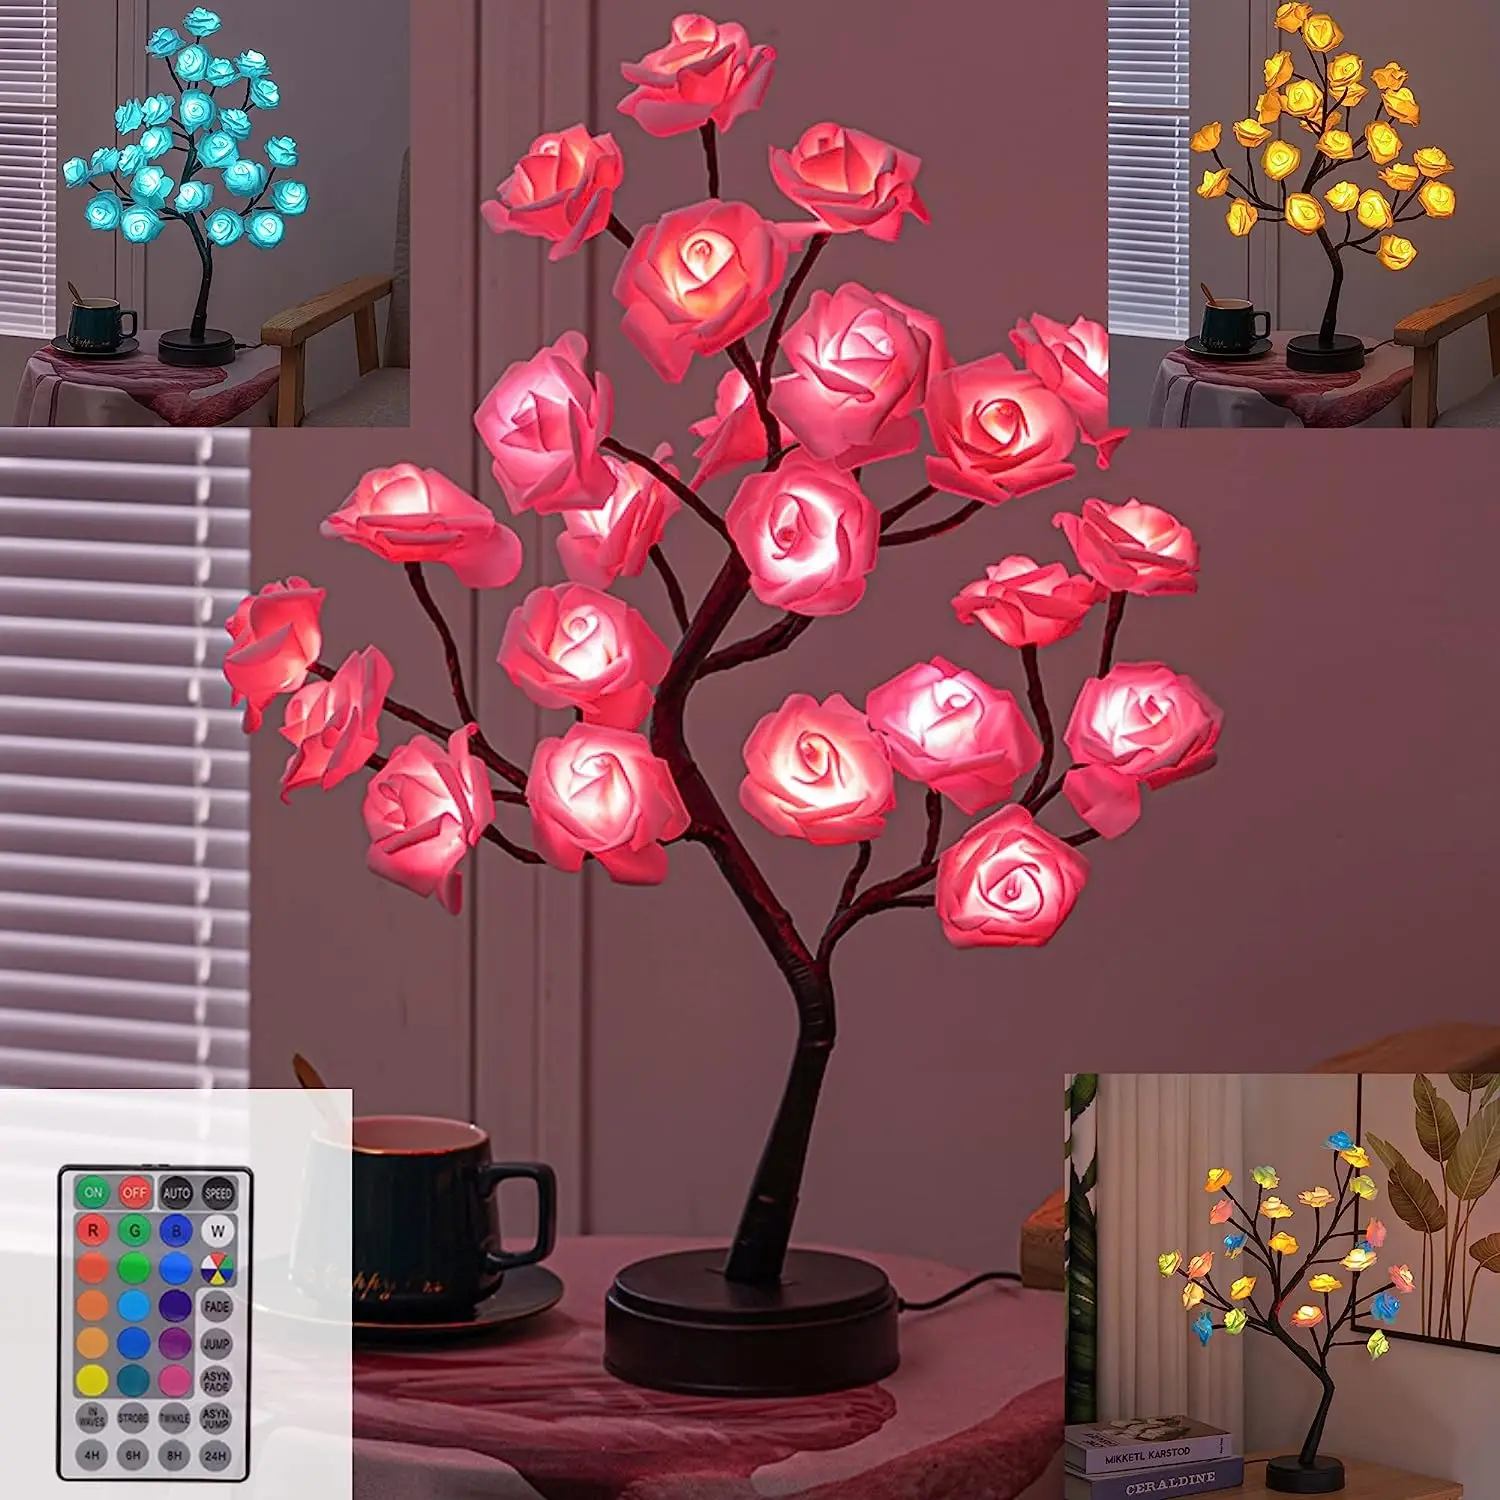 RGB Rose Flower Tree Lights 24LED USB Battery Table Lamp Fairy Night Light Home Party Christmas Wedding Bedroom Decoration Gift led copper wire night light tree fairy lights home decoration night lamp for bedroom bedside table lamp usb and battery operated